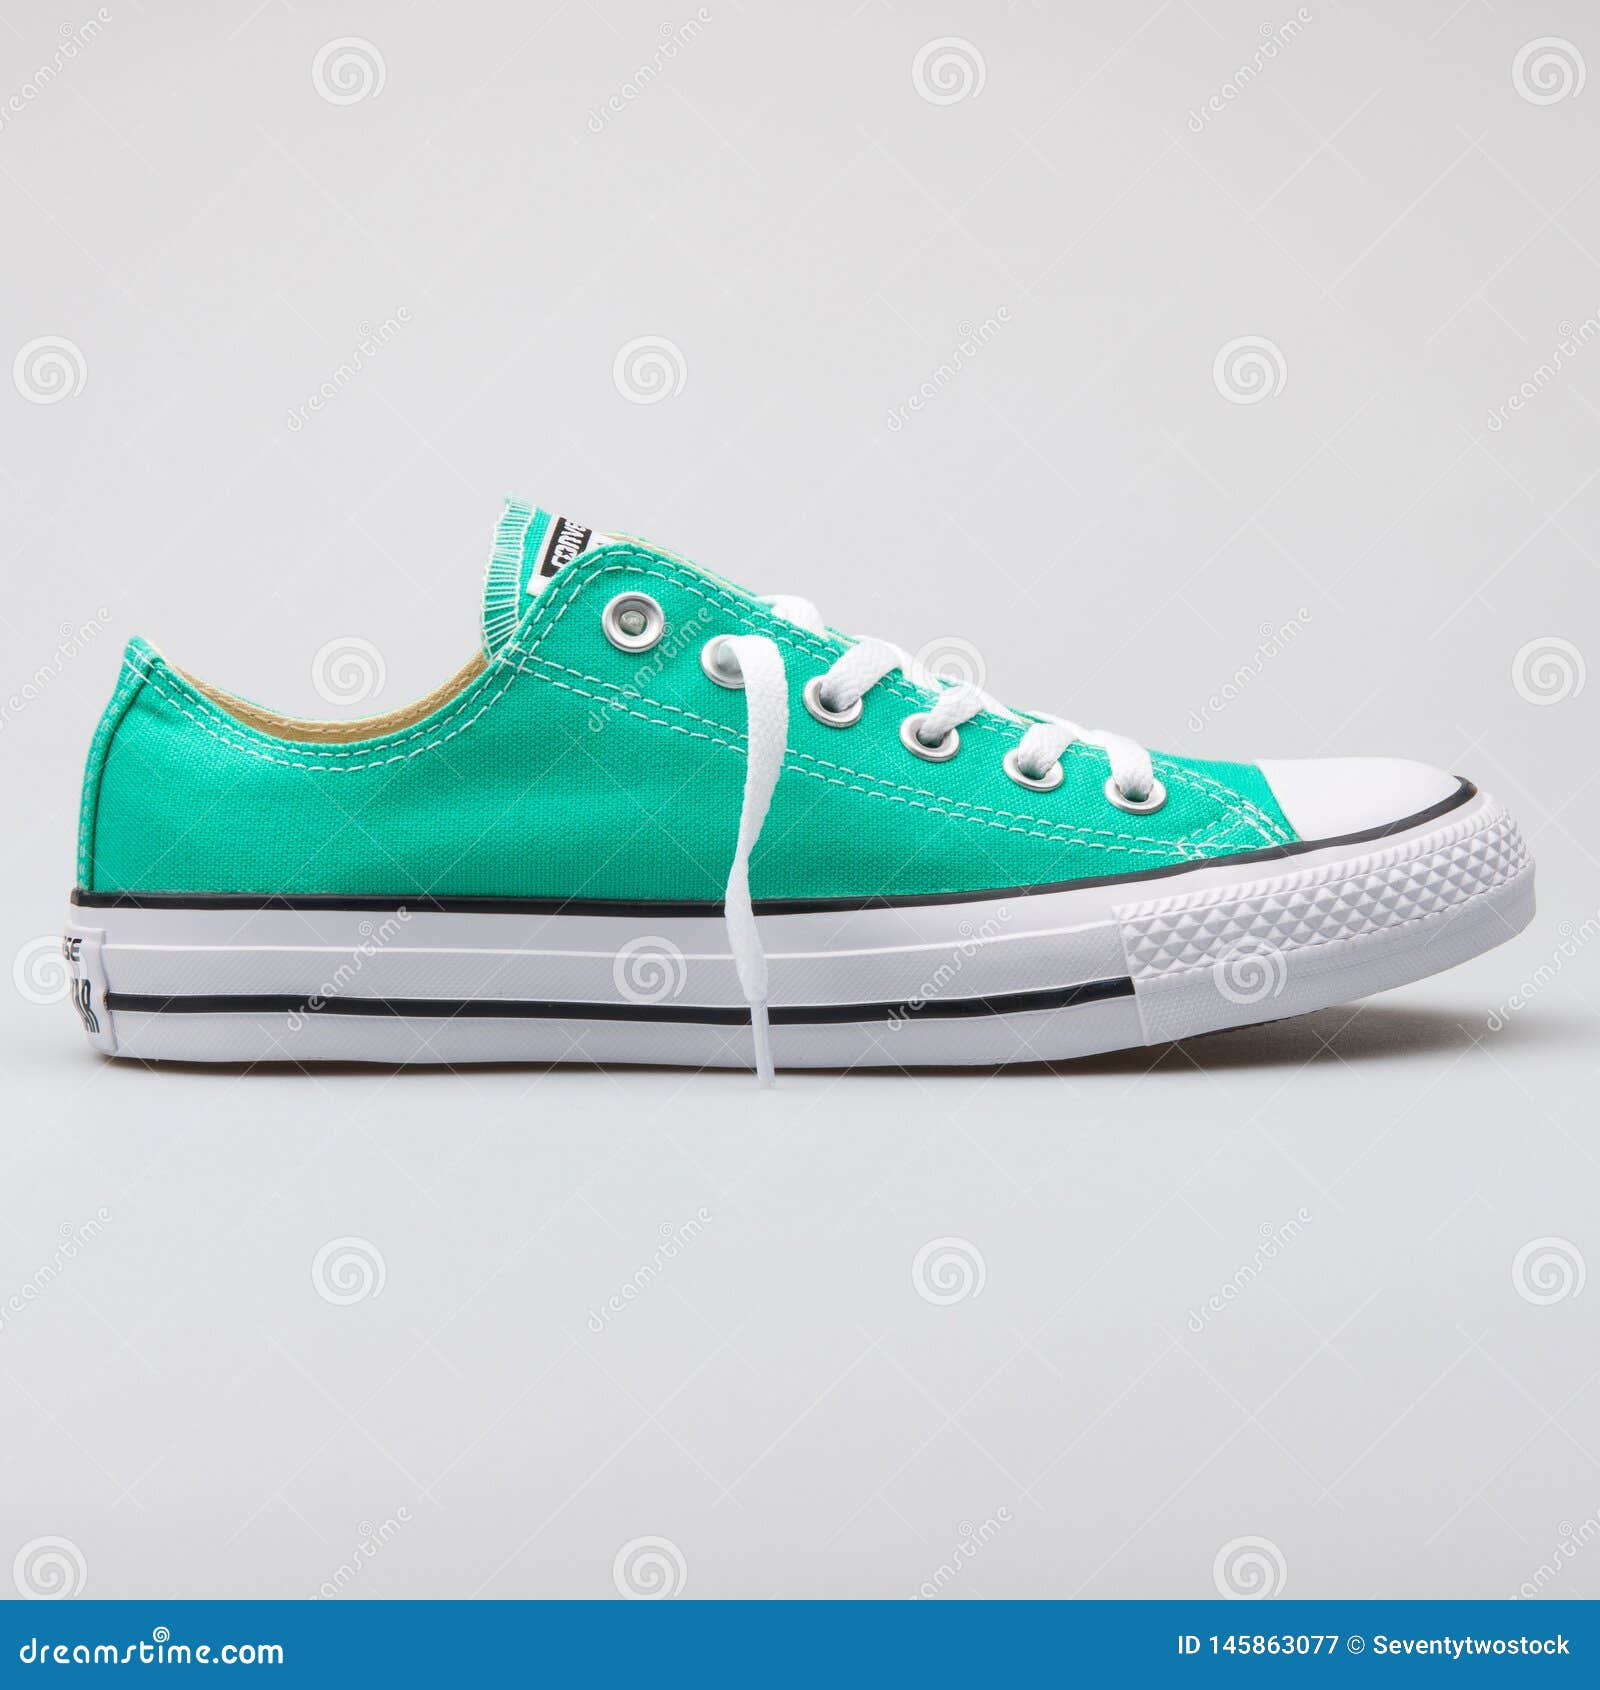 Converse Chuck Taylor All Star OX Green Editorial - Image of sneaker, fashion: 145863077